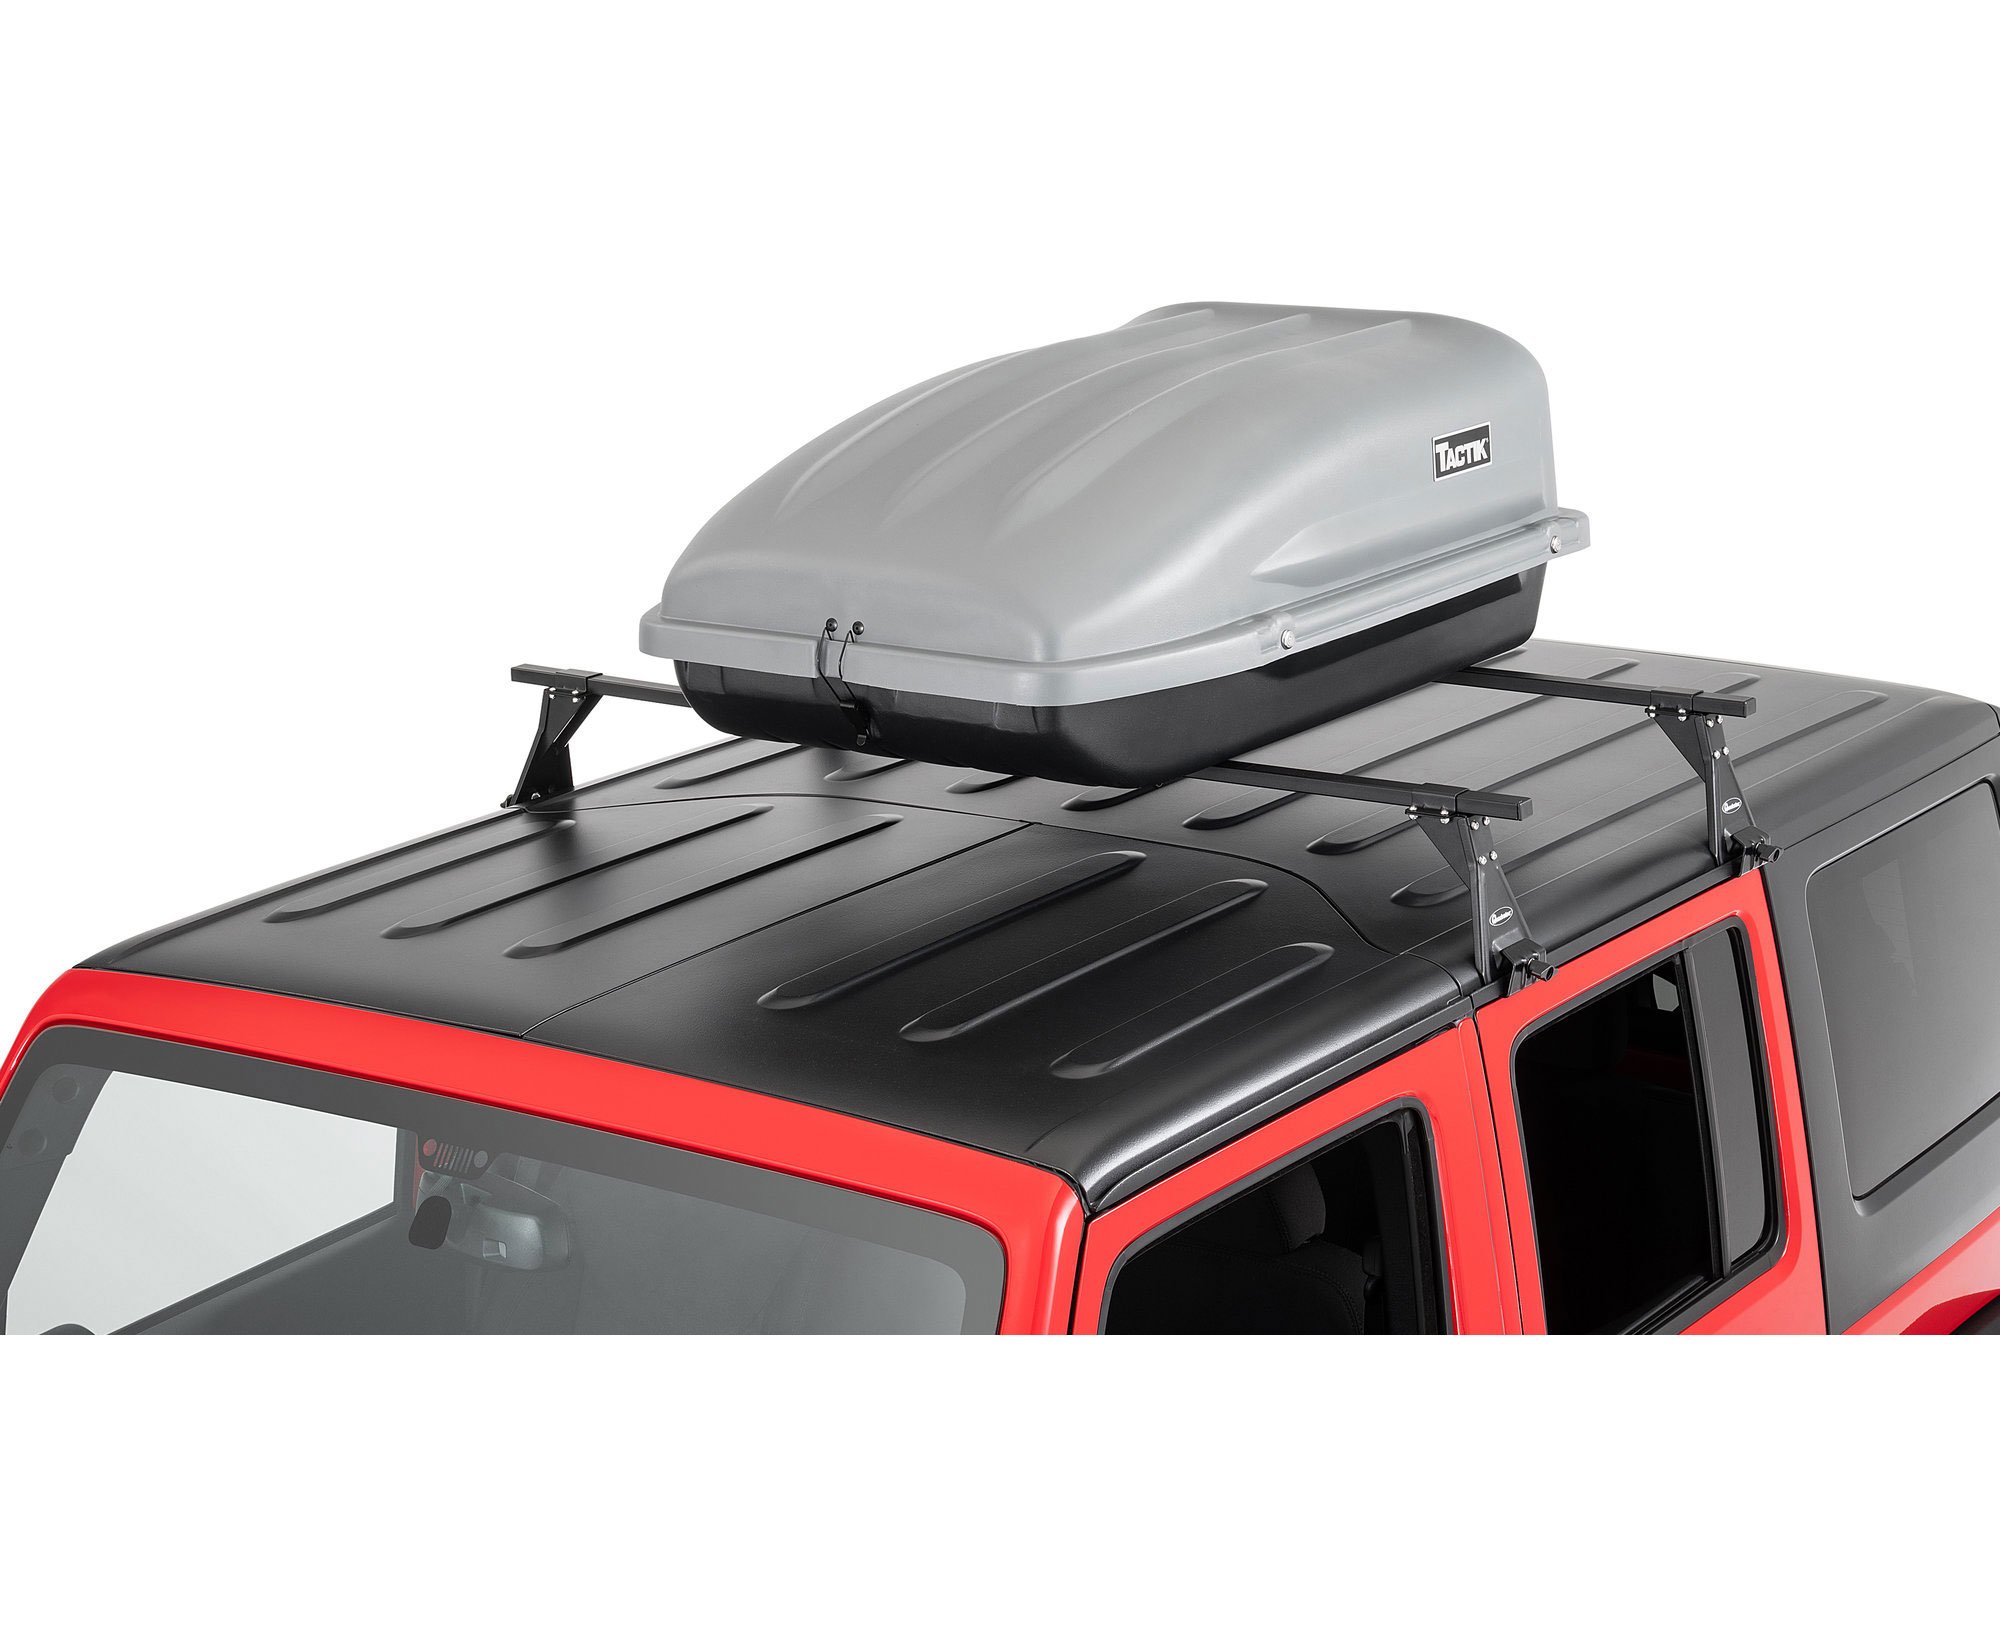 https://www.quadratec.com/sites/default/files/styles/product_zoomed/public/product_images/tactik-roof-top-cargo-carrier-10-cubic-feet-92020-1000-installed-main-cropped1.jpg